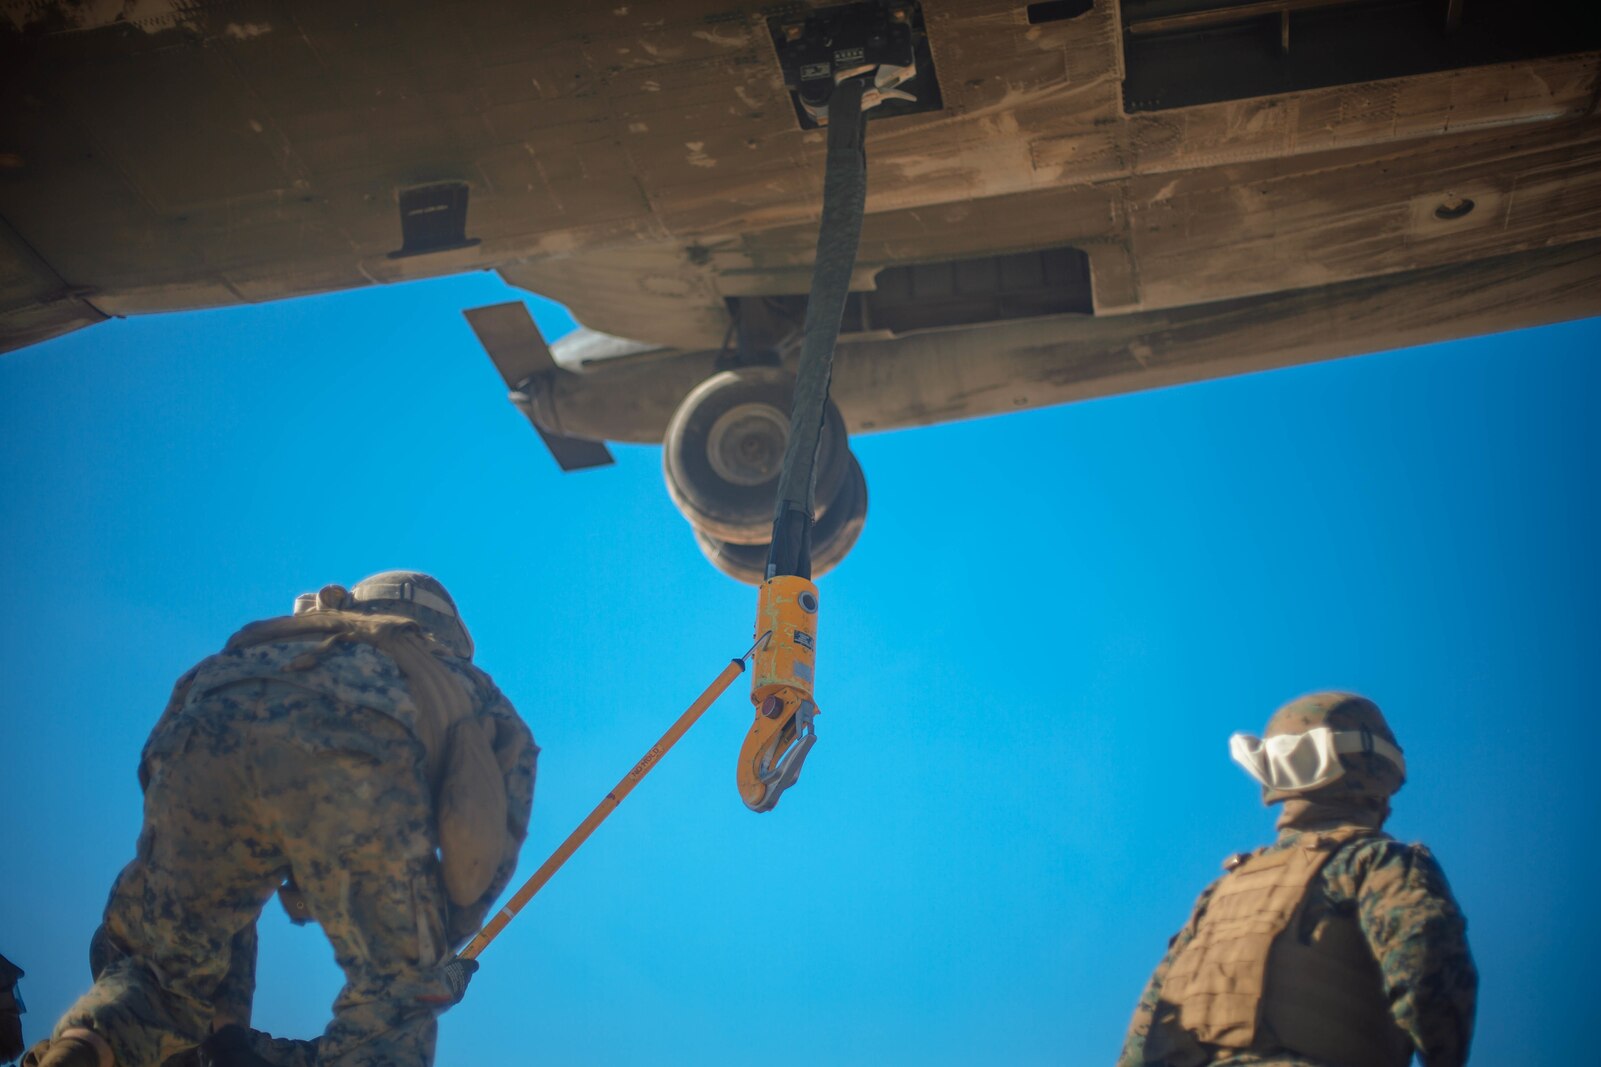 U.S. Marine Corps Sgt. Blake Charres, a loading support specialist with 1st Transportation Support Battalion, 1st Marine Logistics Group, attaches a static hook to a CH-53E Super Stallion from Marine Heavy Helicopter Squadron 465, 3rd Marine Aircraft Wing, during a helicopter support team training exercise as it prepares to lift a Humvee in Yuma, Ariz., on Jan. 23, 2019.